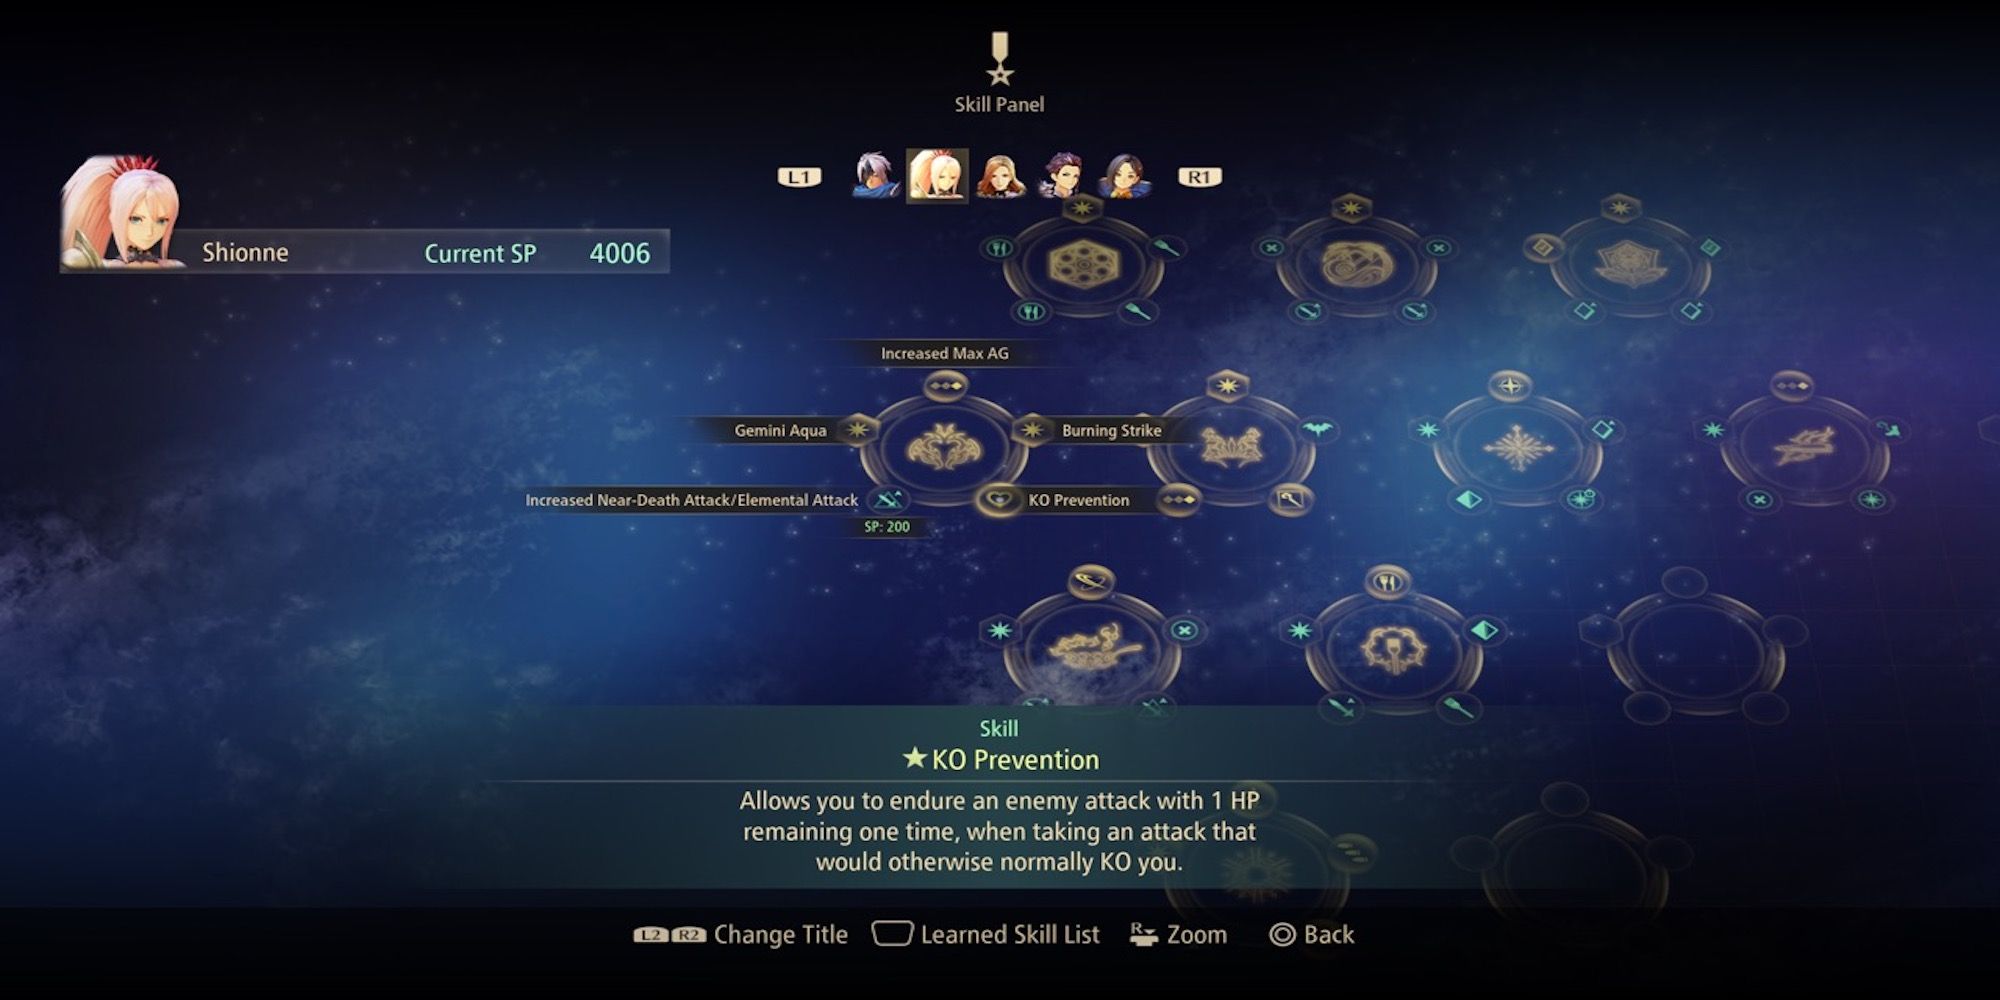 KO Prevention skill in skill menu from Tales of Arise